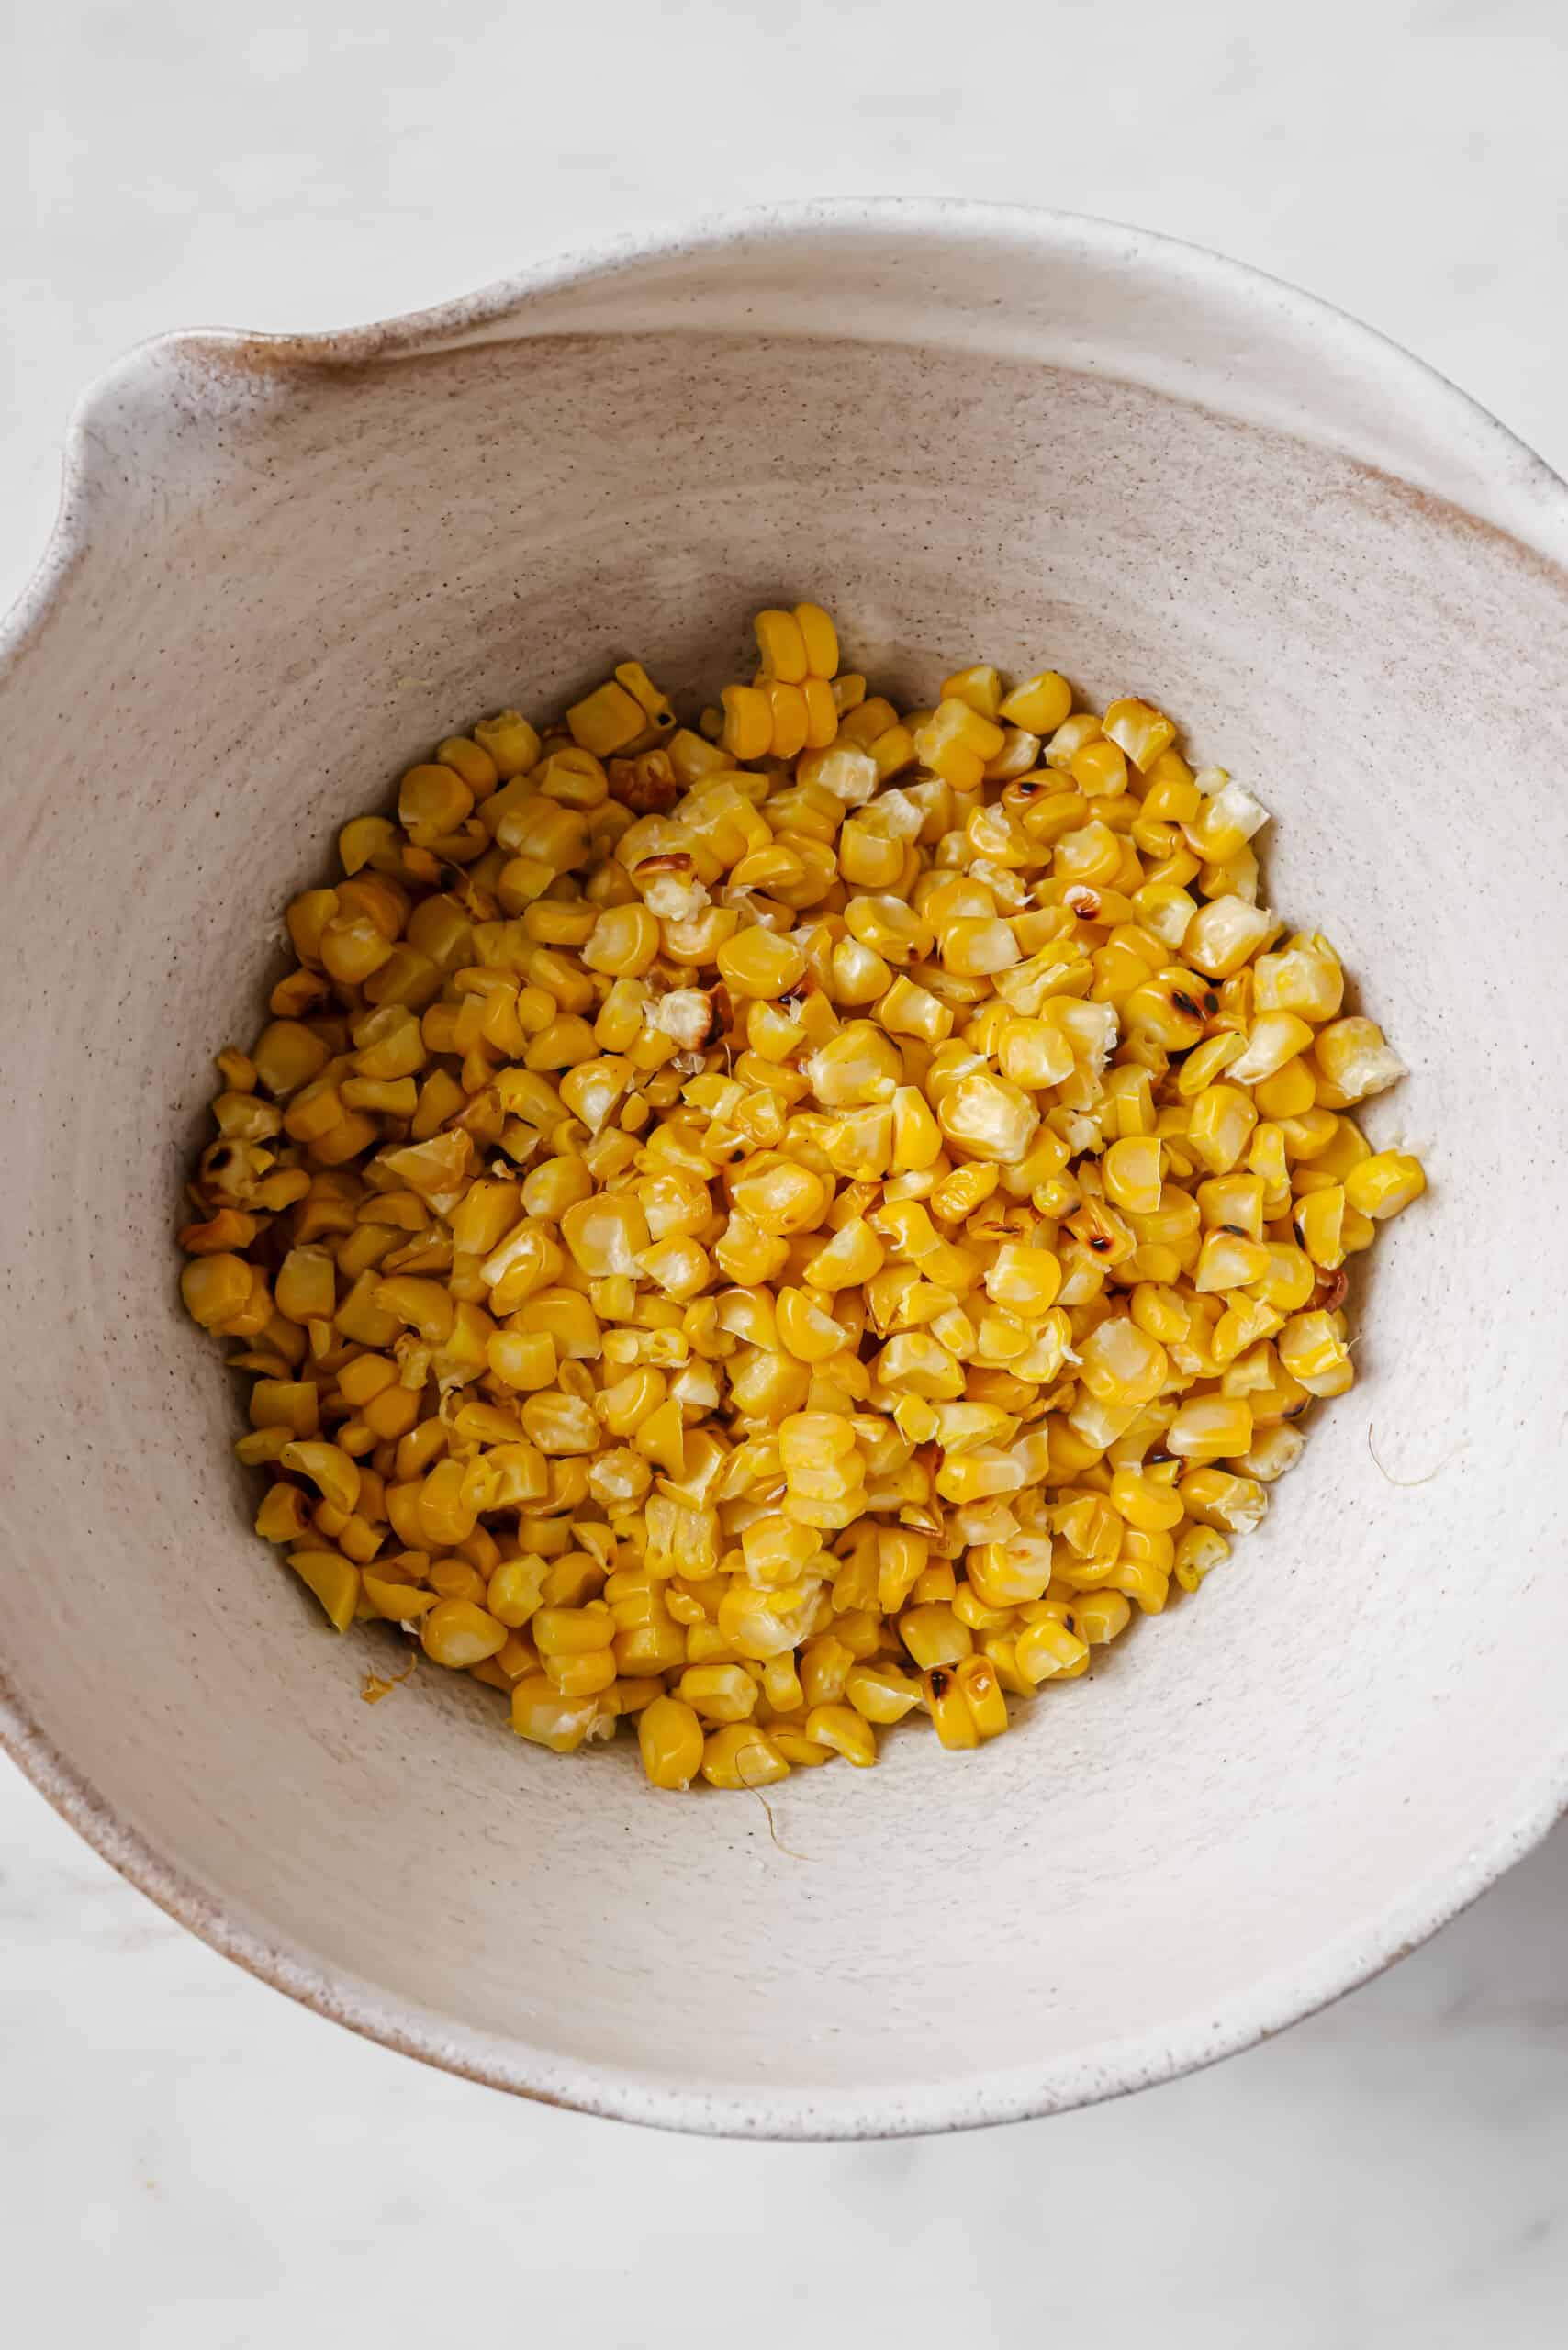 Placing the corn kernels in a bowl.